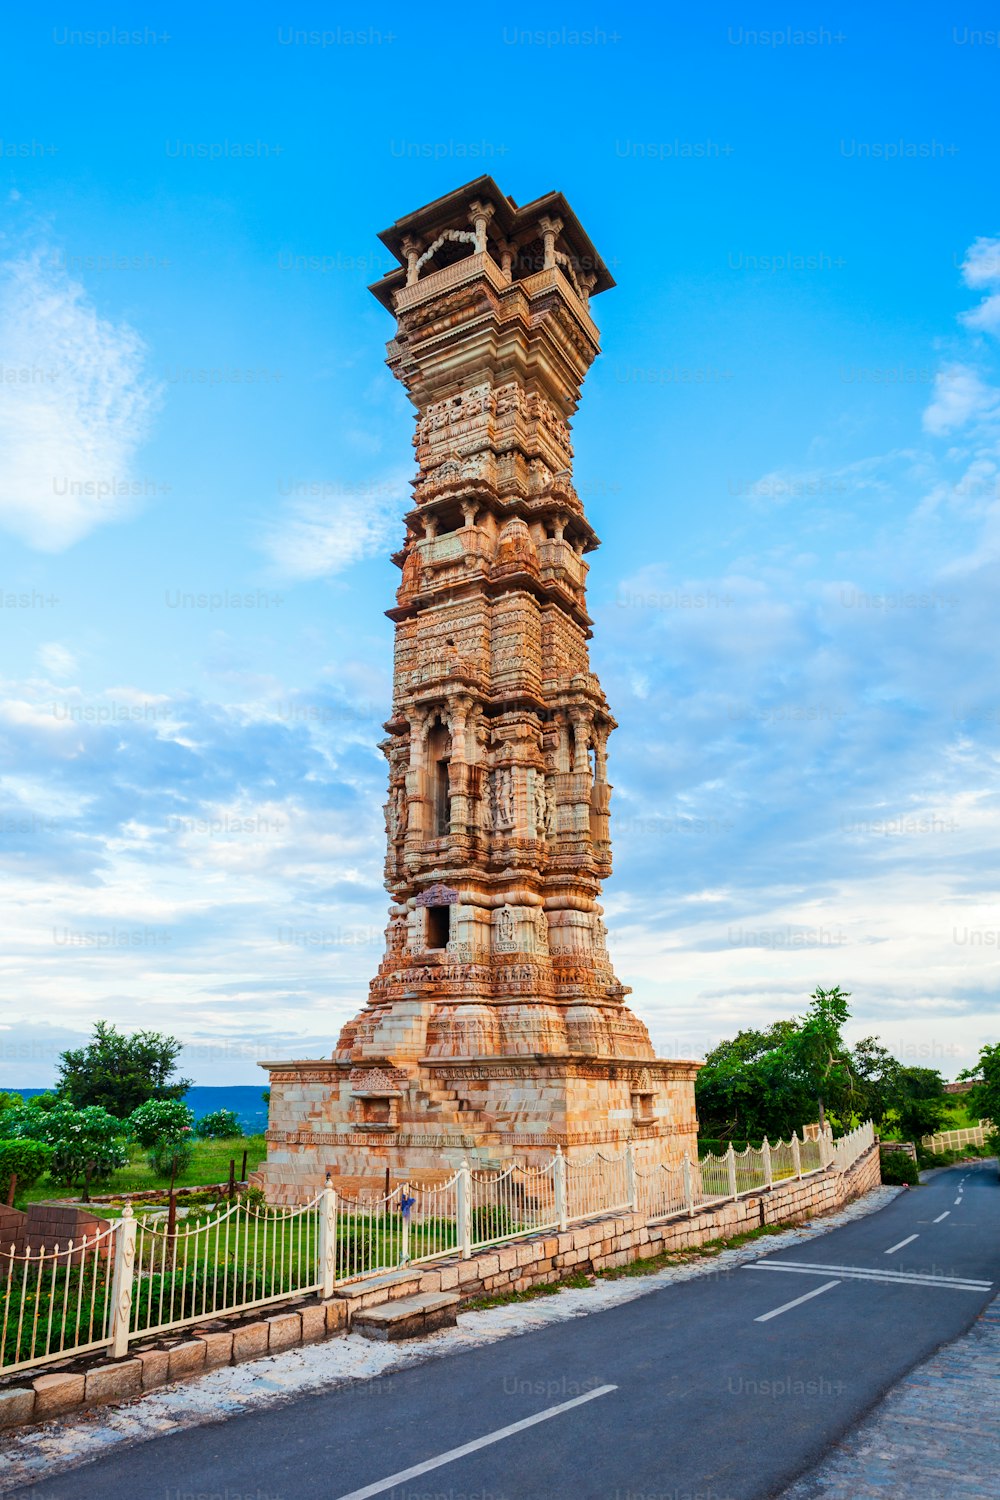 Kirti Stambh means Tower of Fame is a monument tower in Chittor Fort in Chittorgarh city, Rajasthan state of India